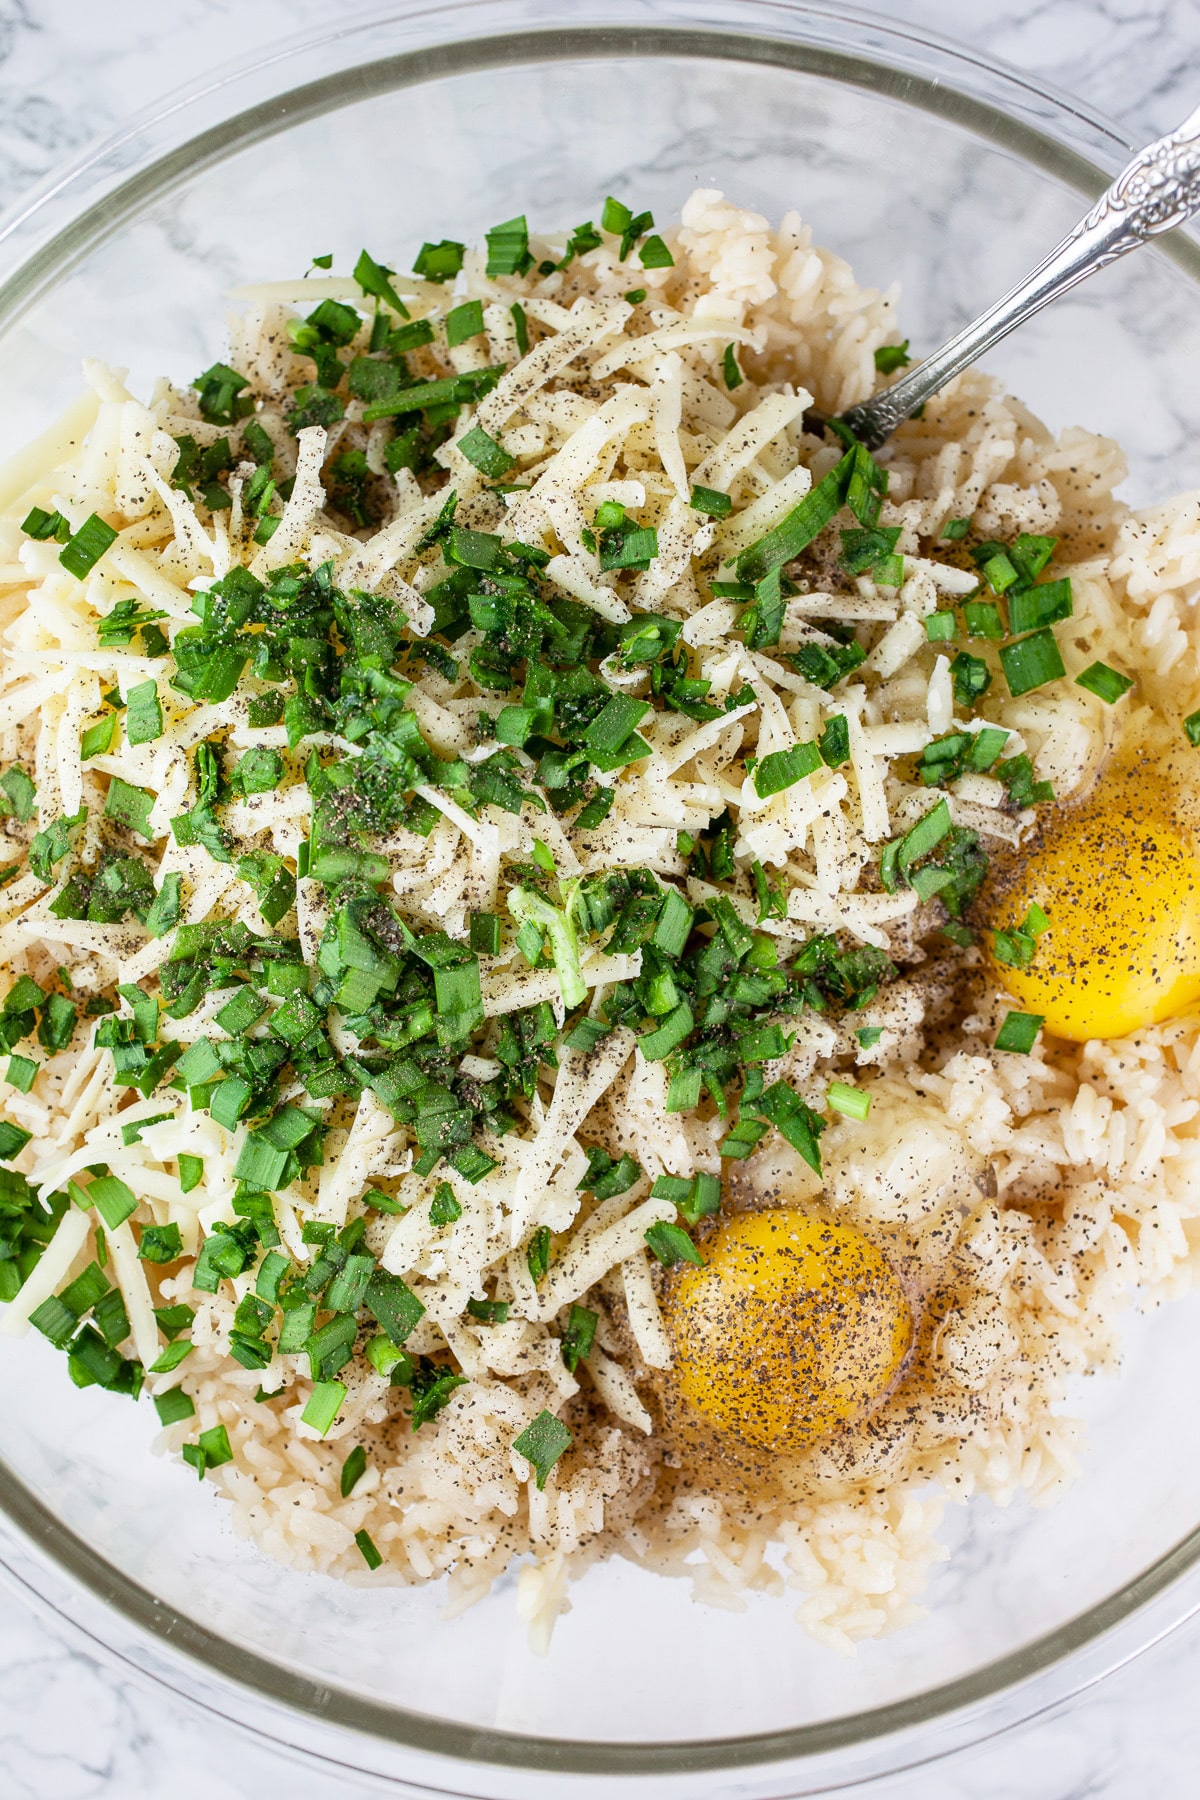 Rice, eggs, shredded cheese, and herbs in glass mixing bowl.